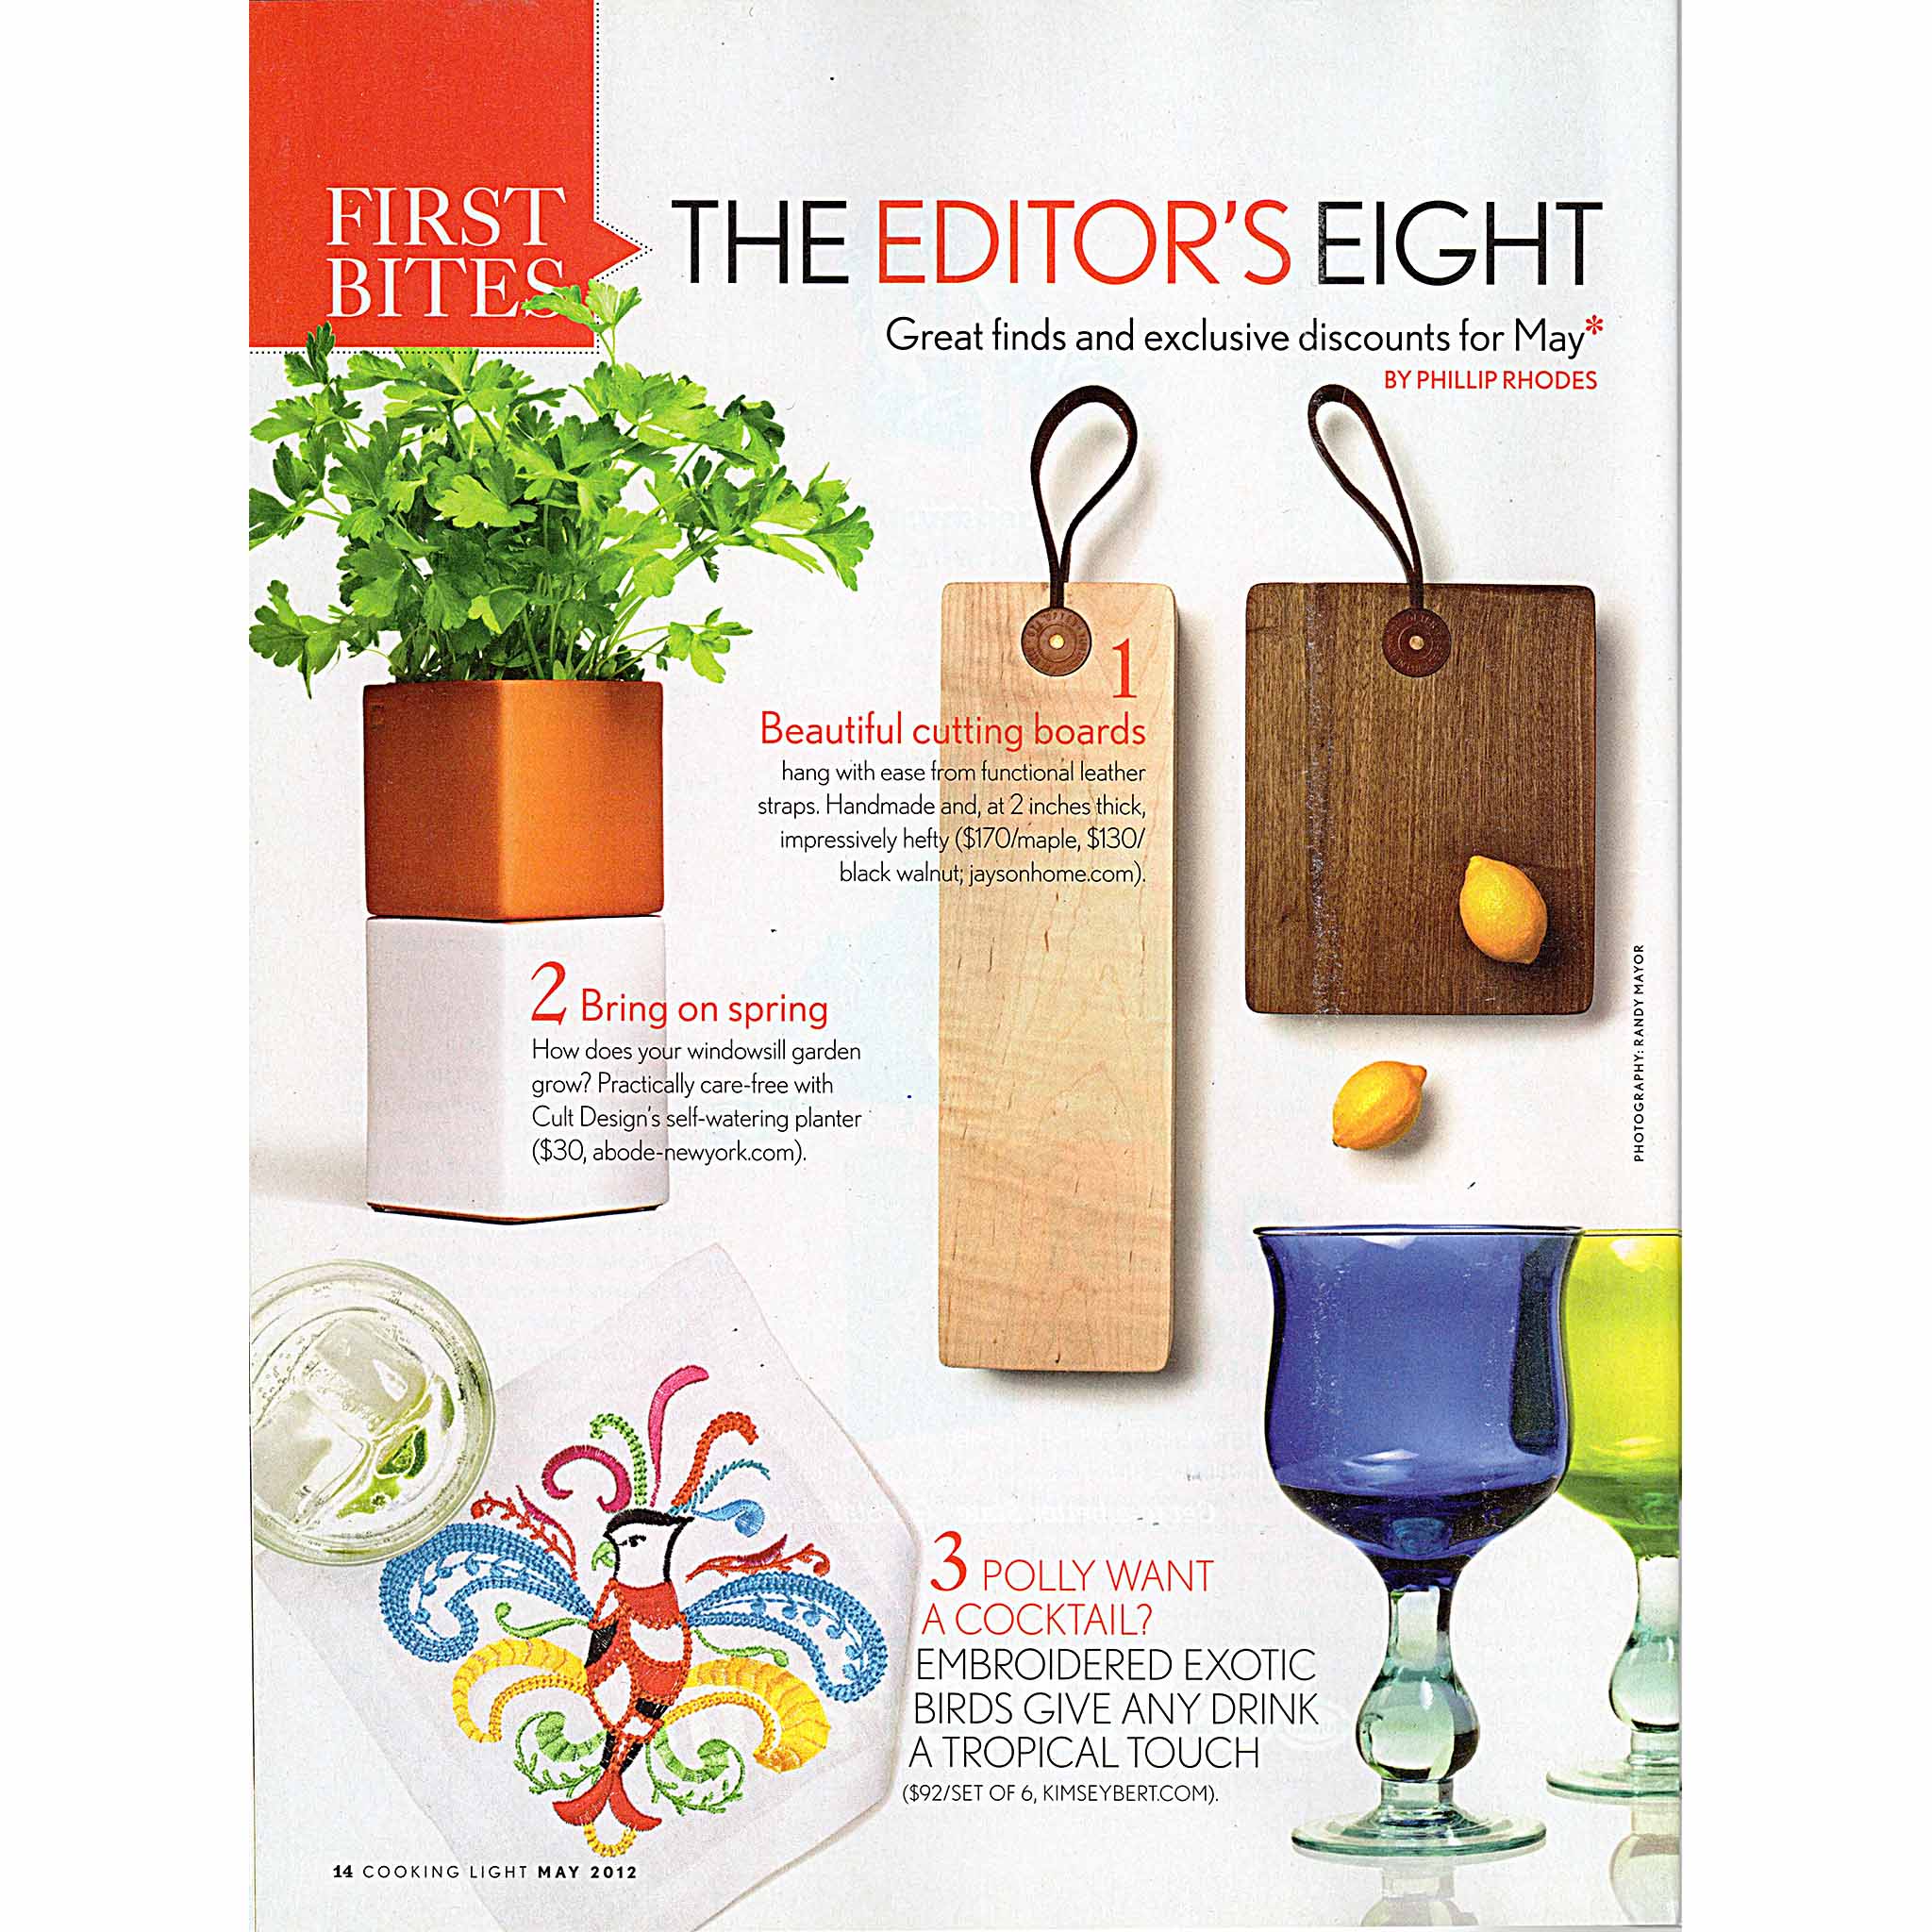 Cooking Light, First Bites – Cooking 101: The Editor's Eight by Phillips Rhodes. Photo: Randy Mayor. Cult Design's Evergreen Self-Watering Planter, May 2012.